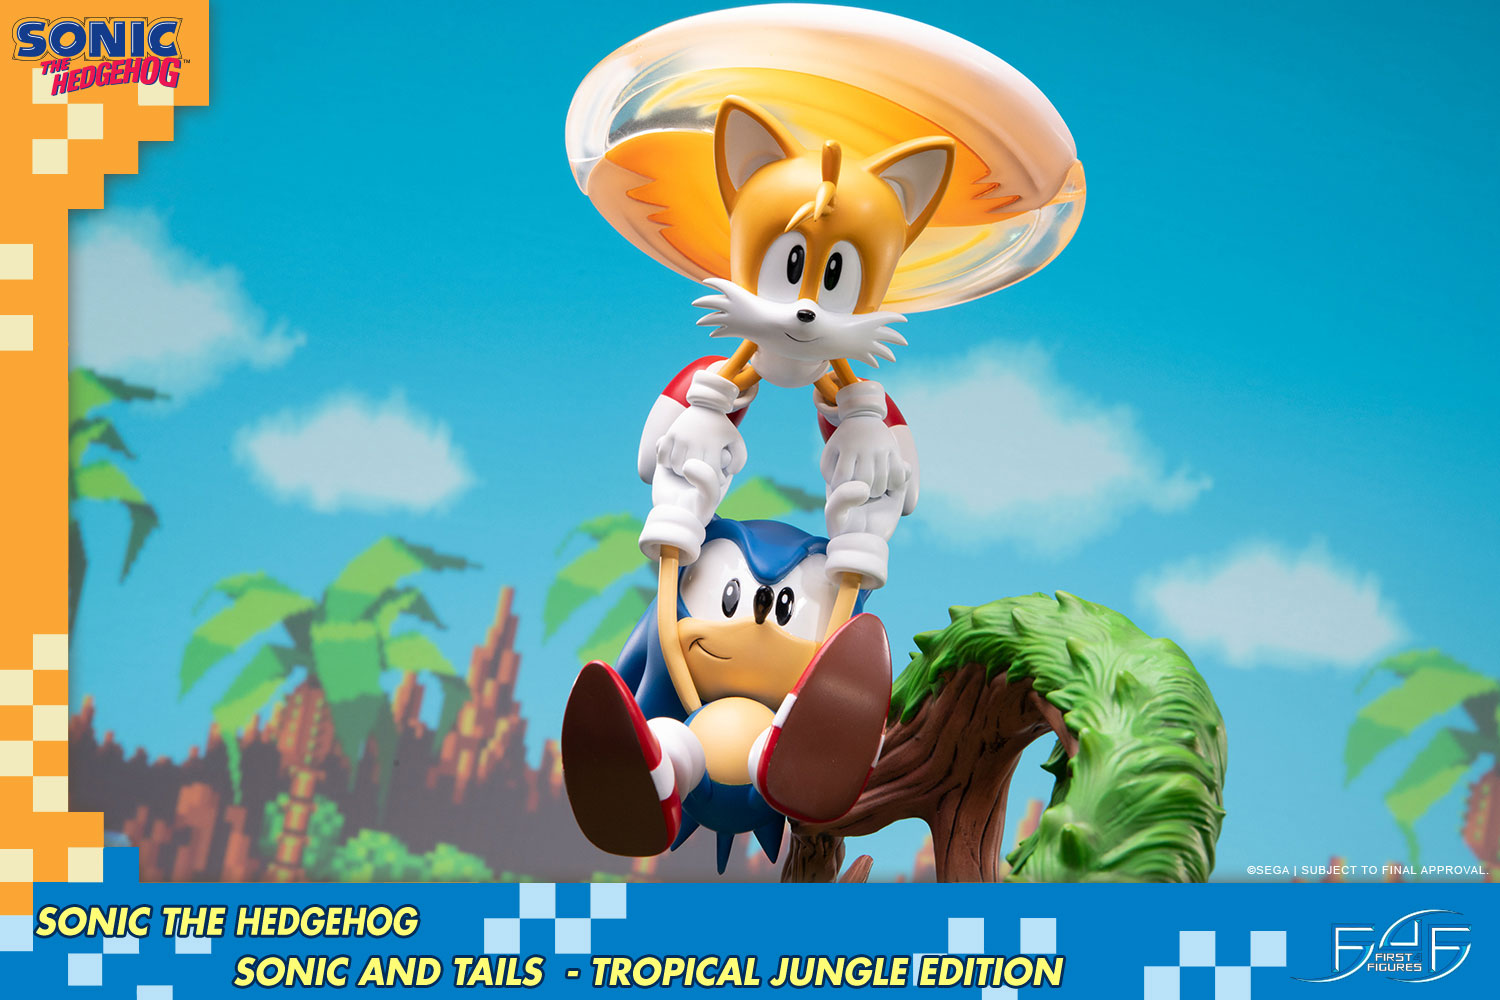 Sonic and Tails (Tropical Jungle Edition)